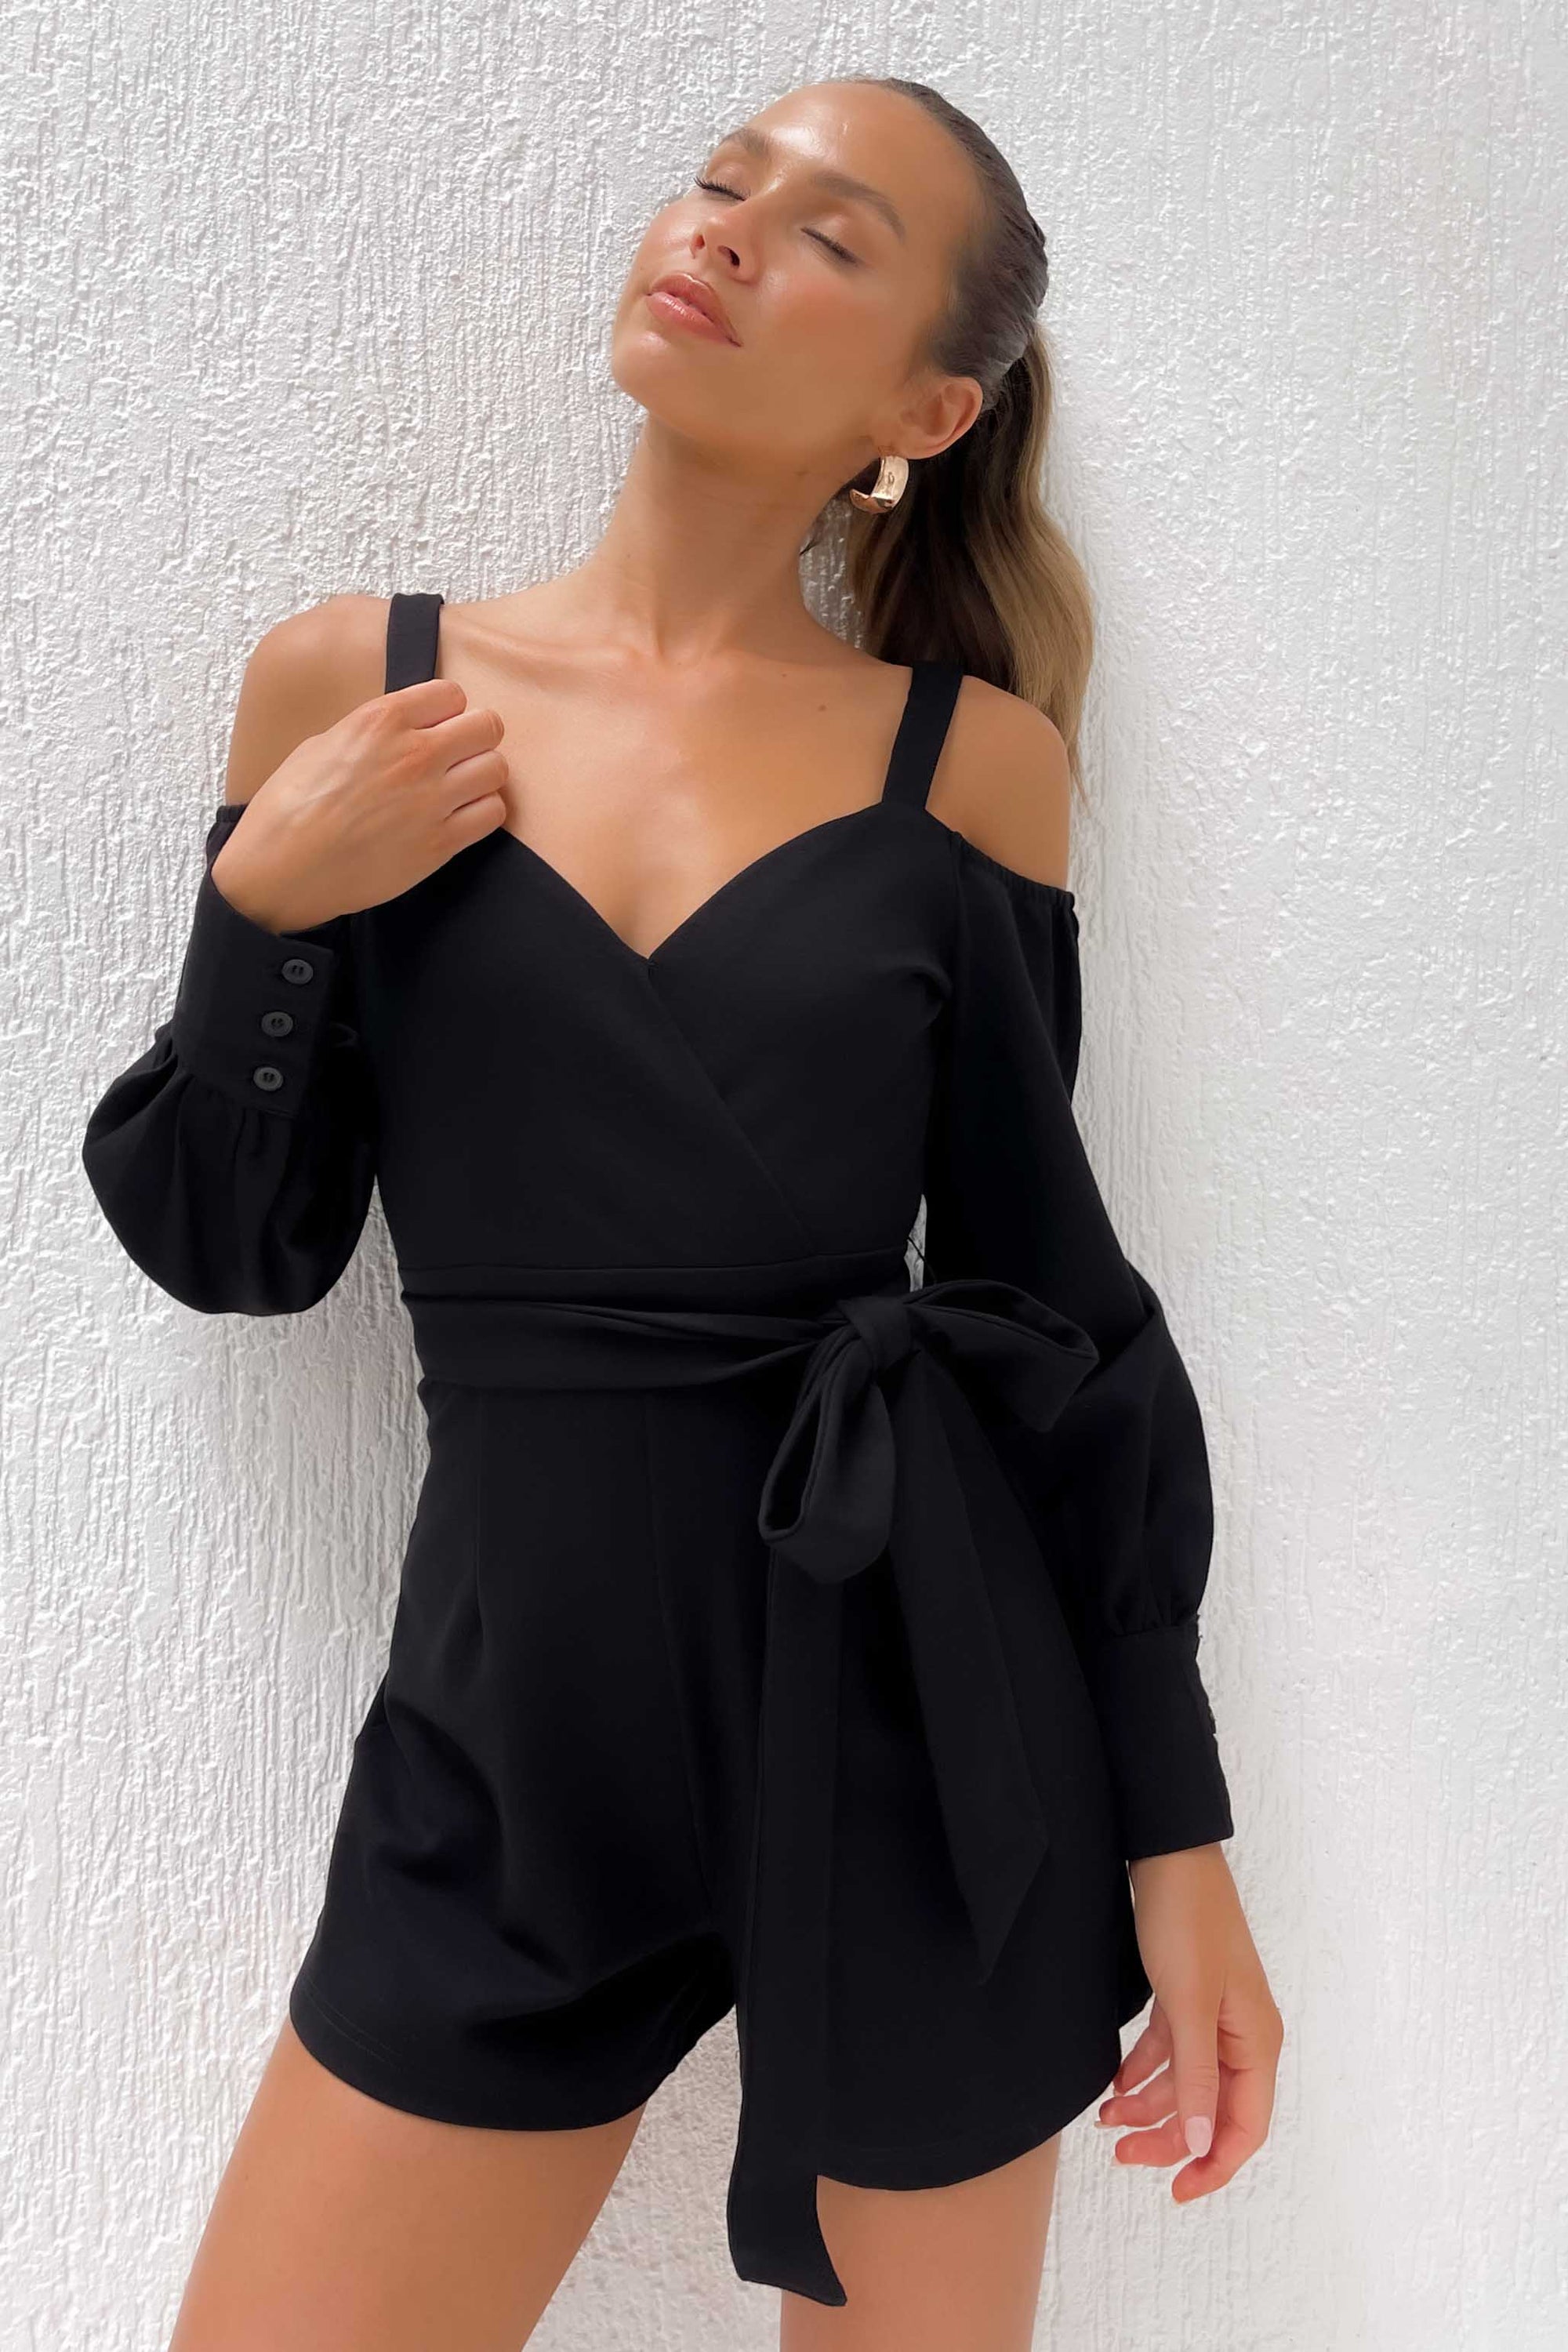 Changing Playsuit, BLACK, LONG SLEEVE, new arrivals, PLAYSUIT, PLAYSUITS, SPANDEX & NYLON & RAYON, SPANDEX AND NYLON AND RAYON, , -MISHKAH